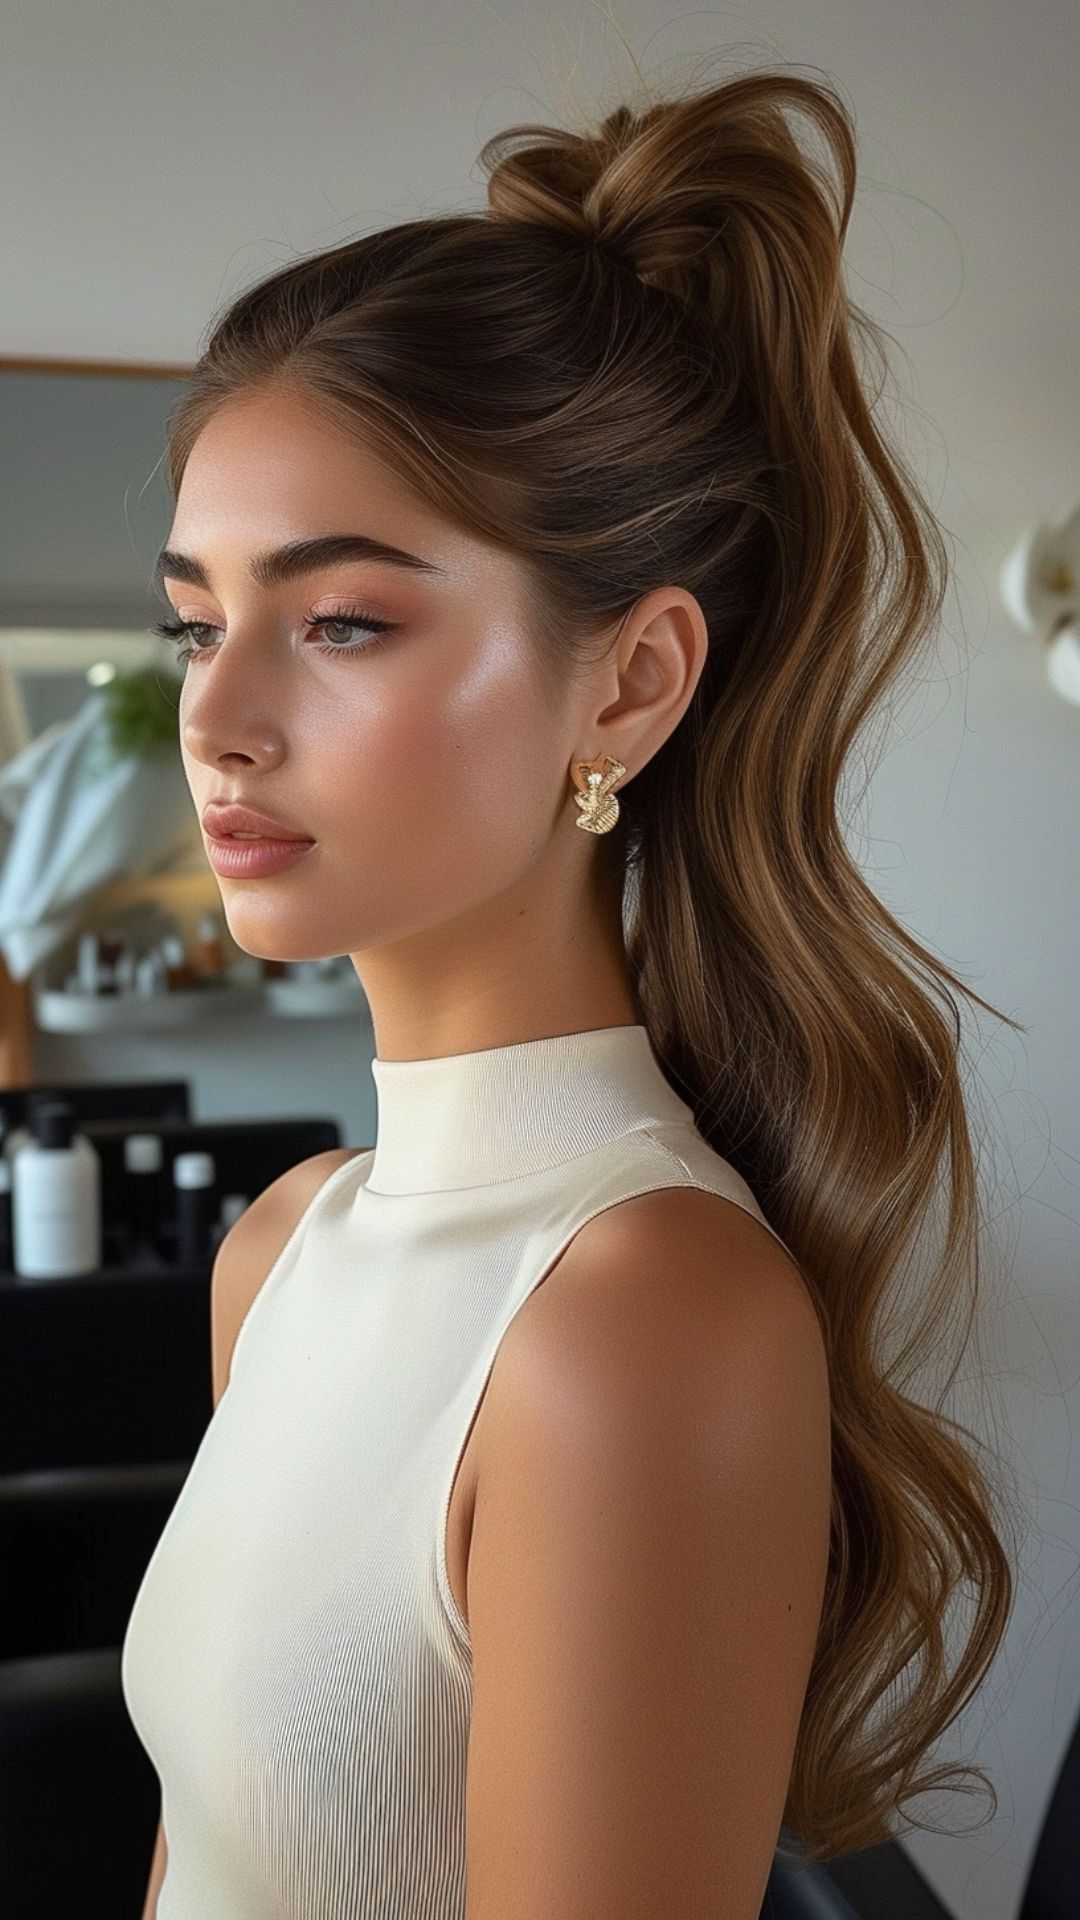 Get Ready to Shine: Perfect Prom Hairstyles for a Night to Remember